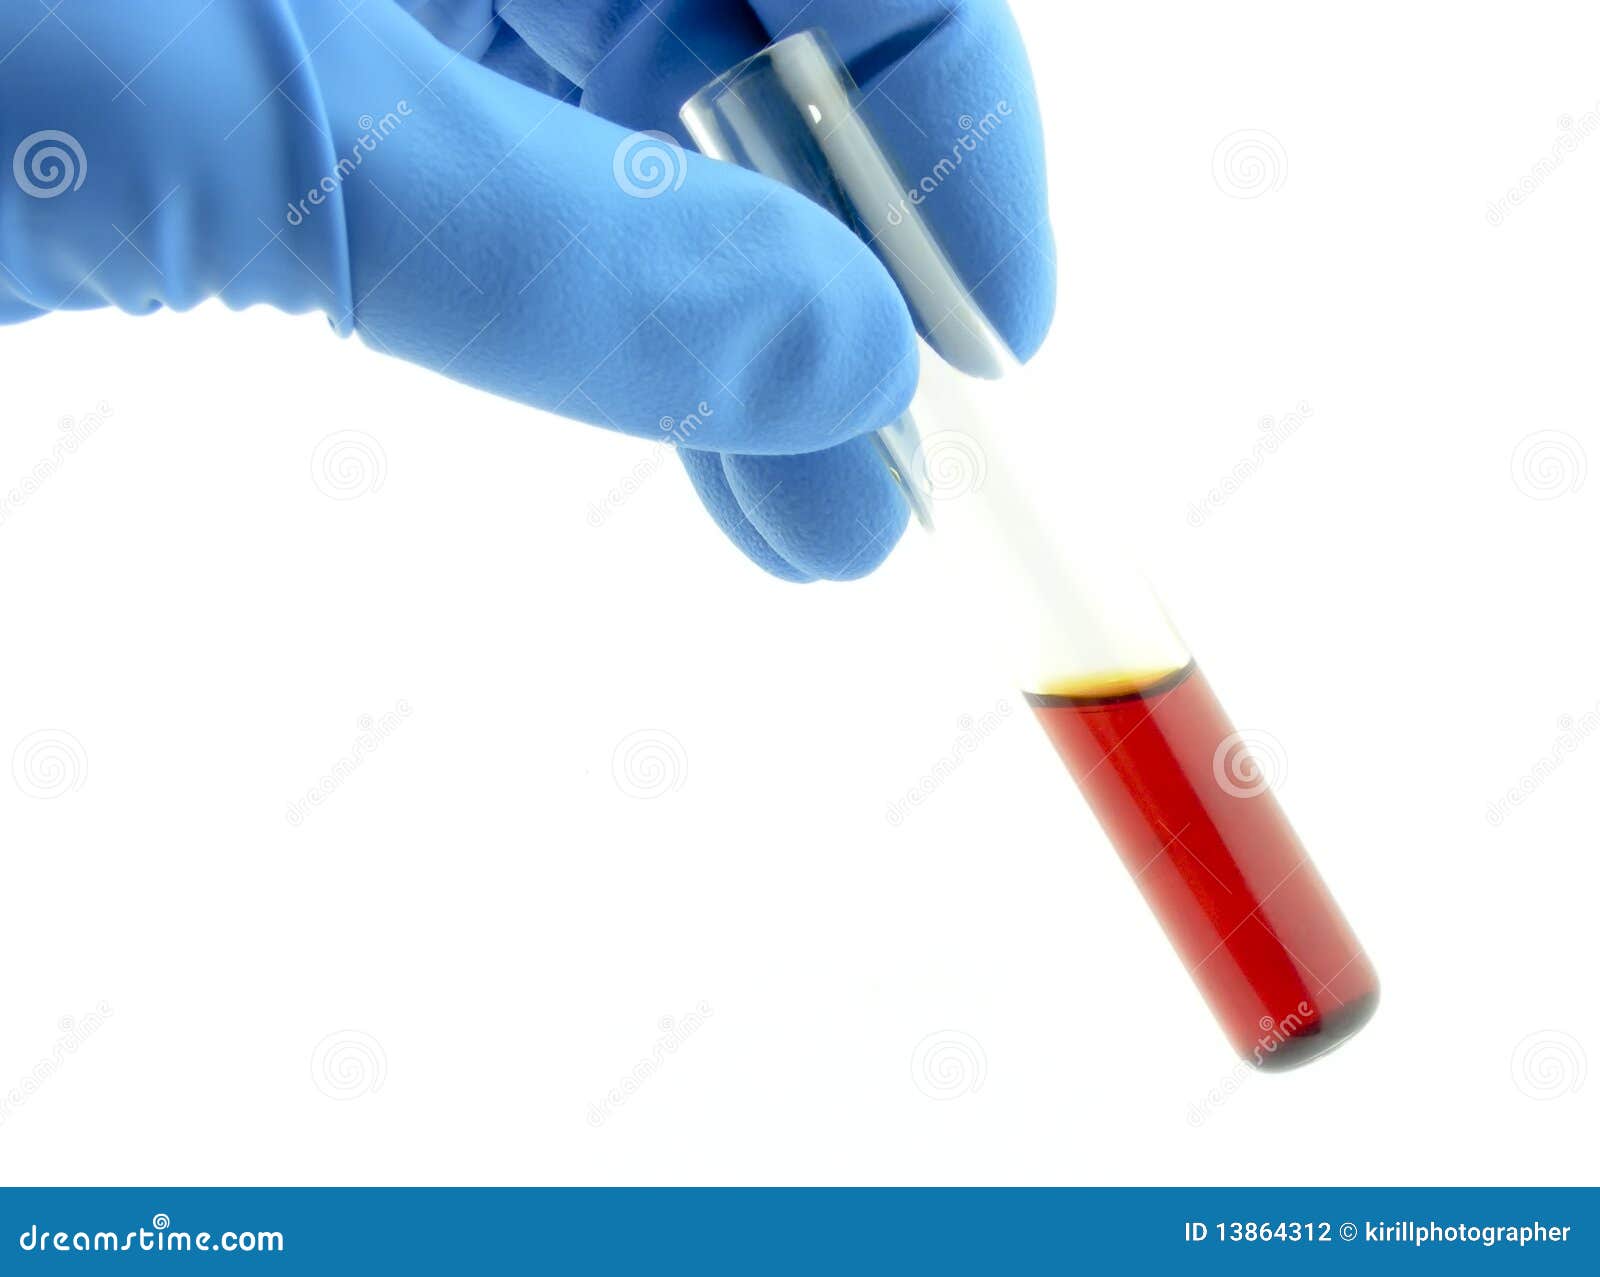 vial with chemical